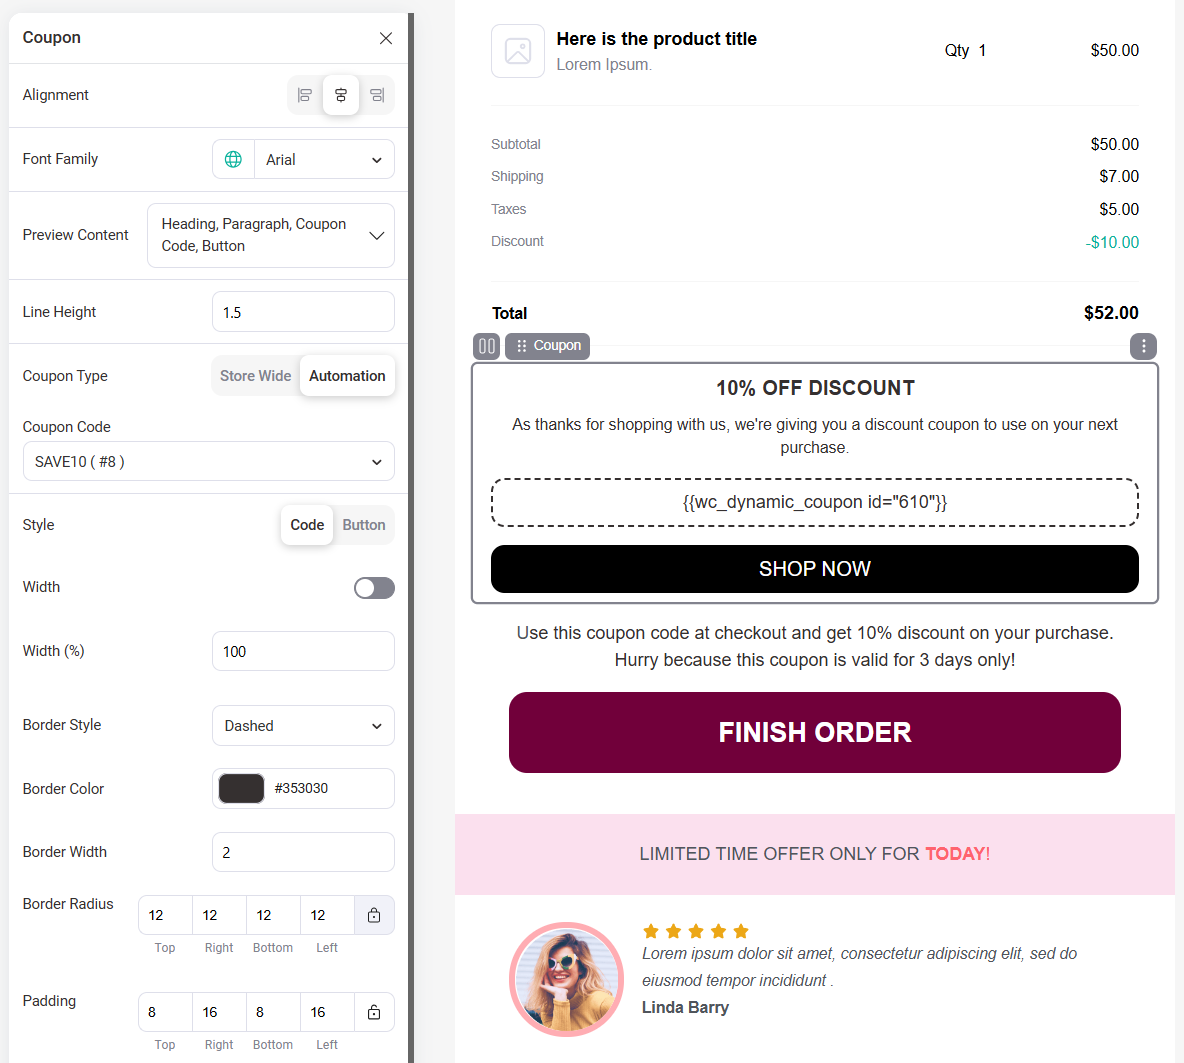 Paste the coupon into your woocommerce cart abandonment email